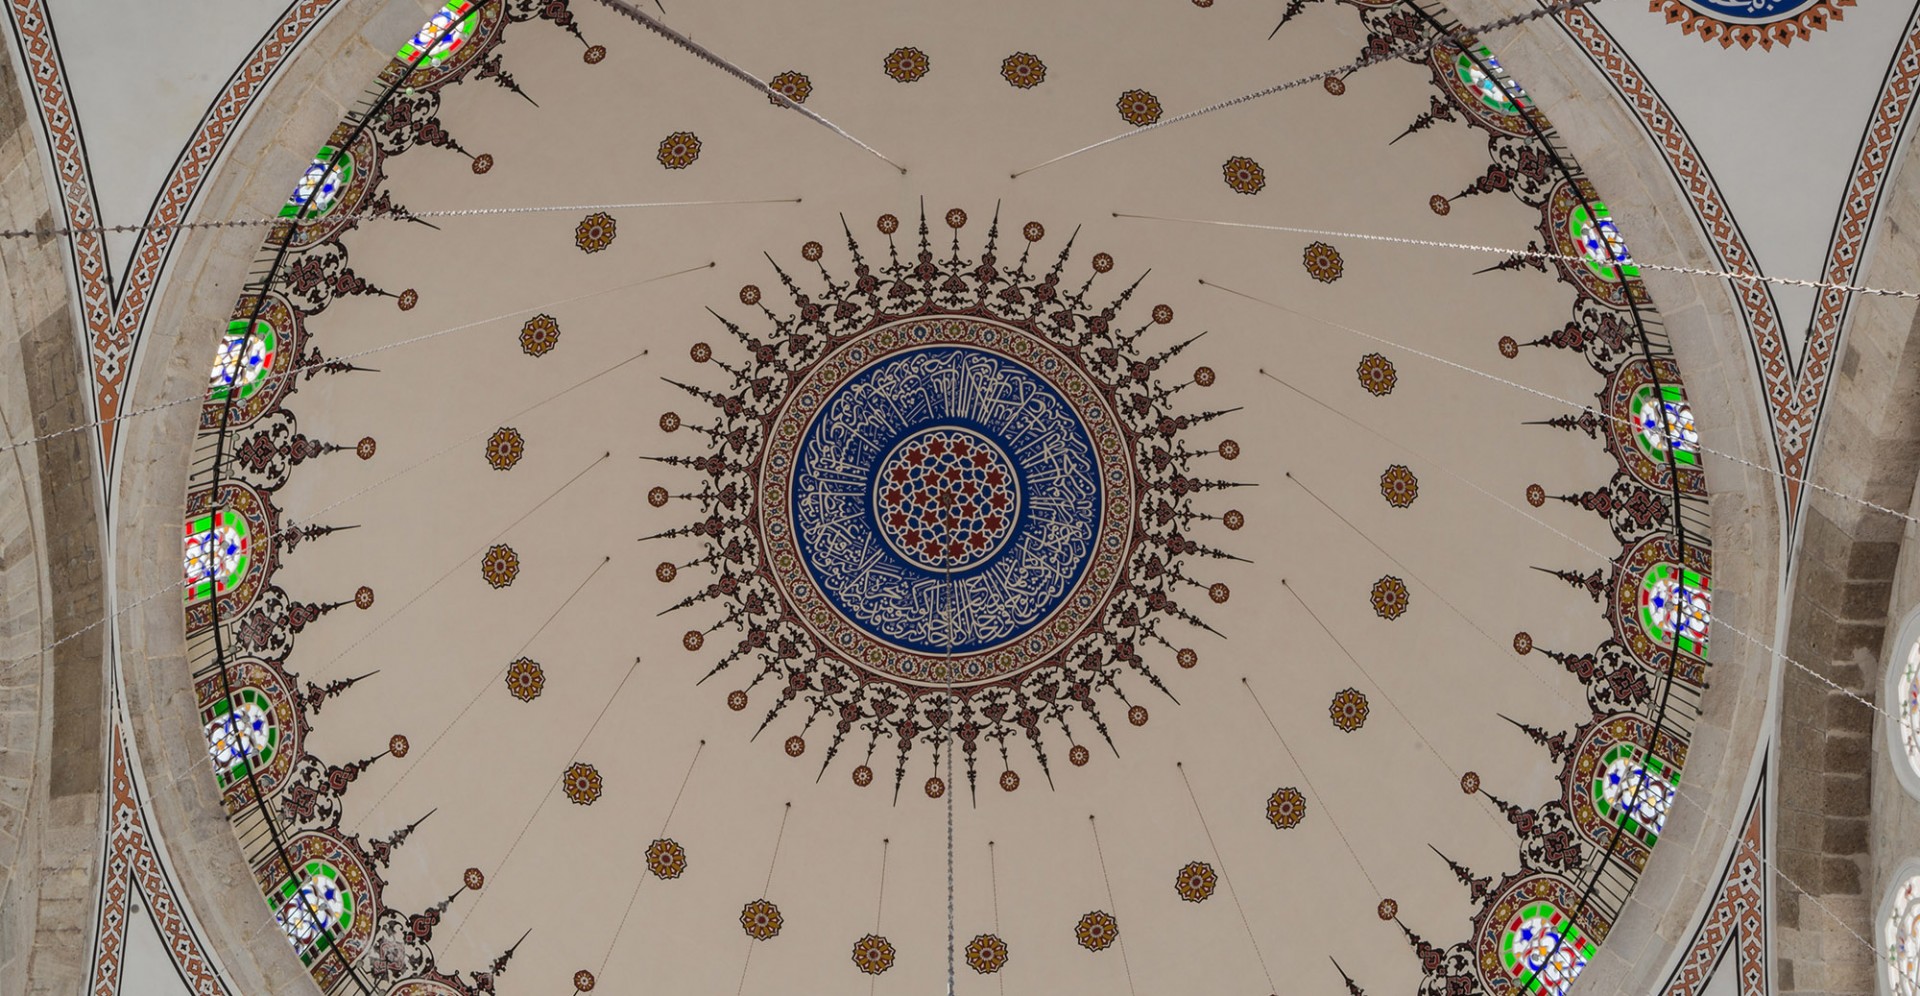 Dome of Mihrimah Sultan Camii